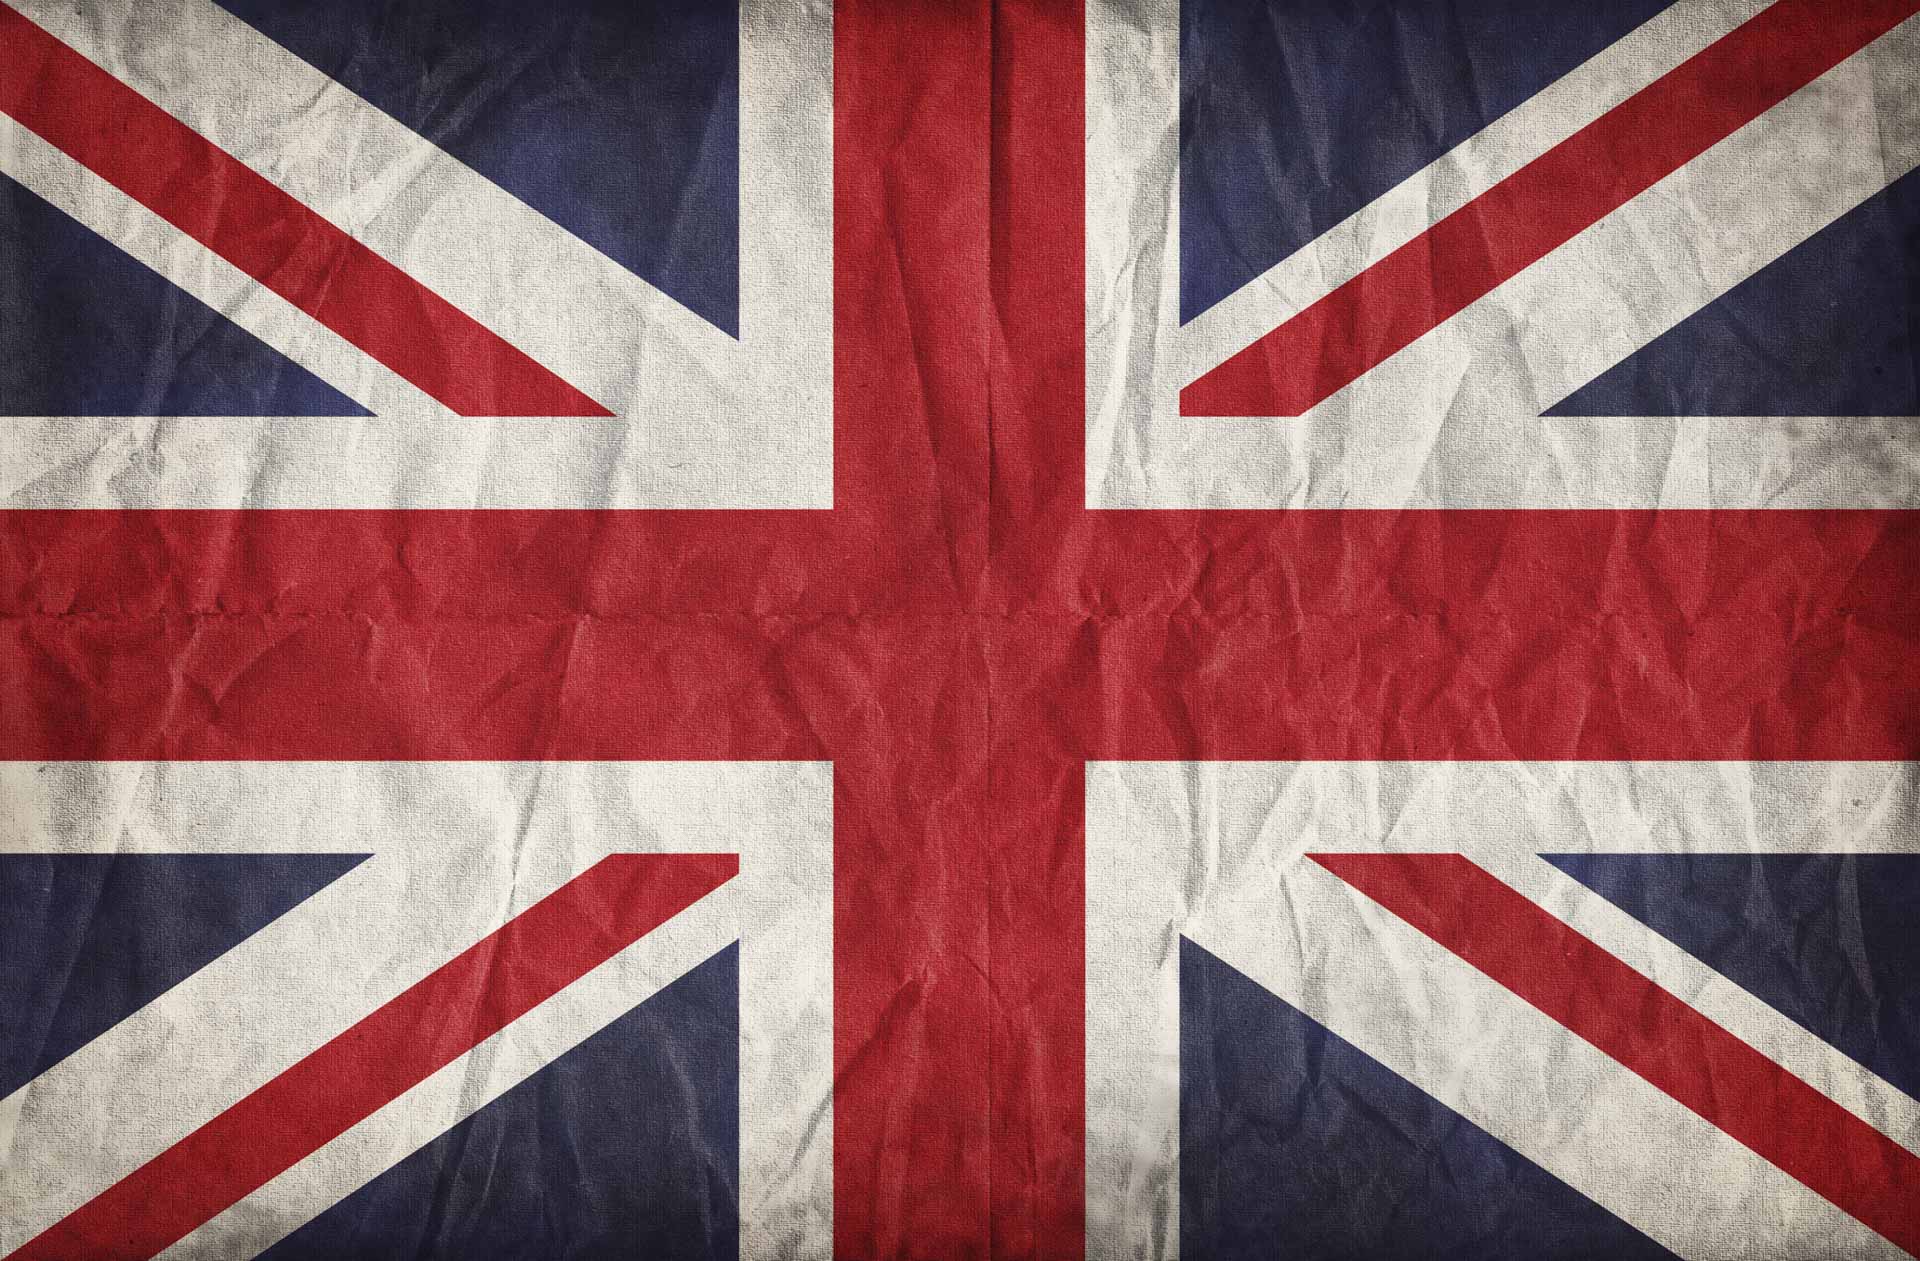 Union Jack on crumpled paper background. Vintage effect